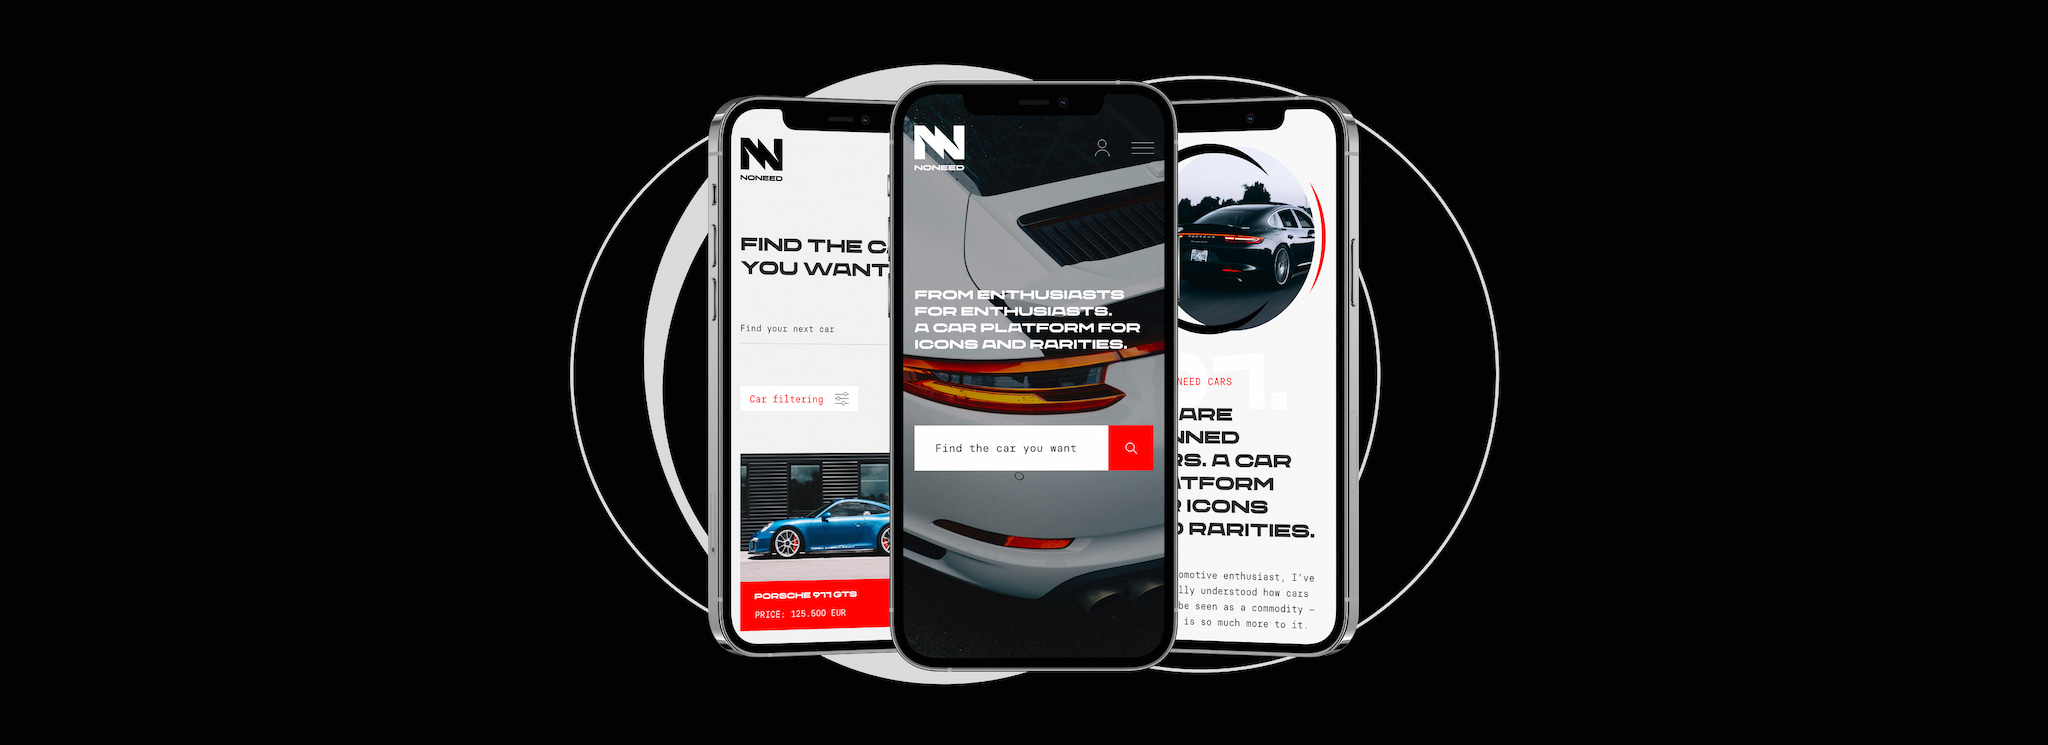 NONEED CARS Corporate Design by Flipped Mountain